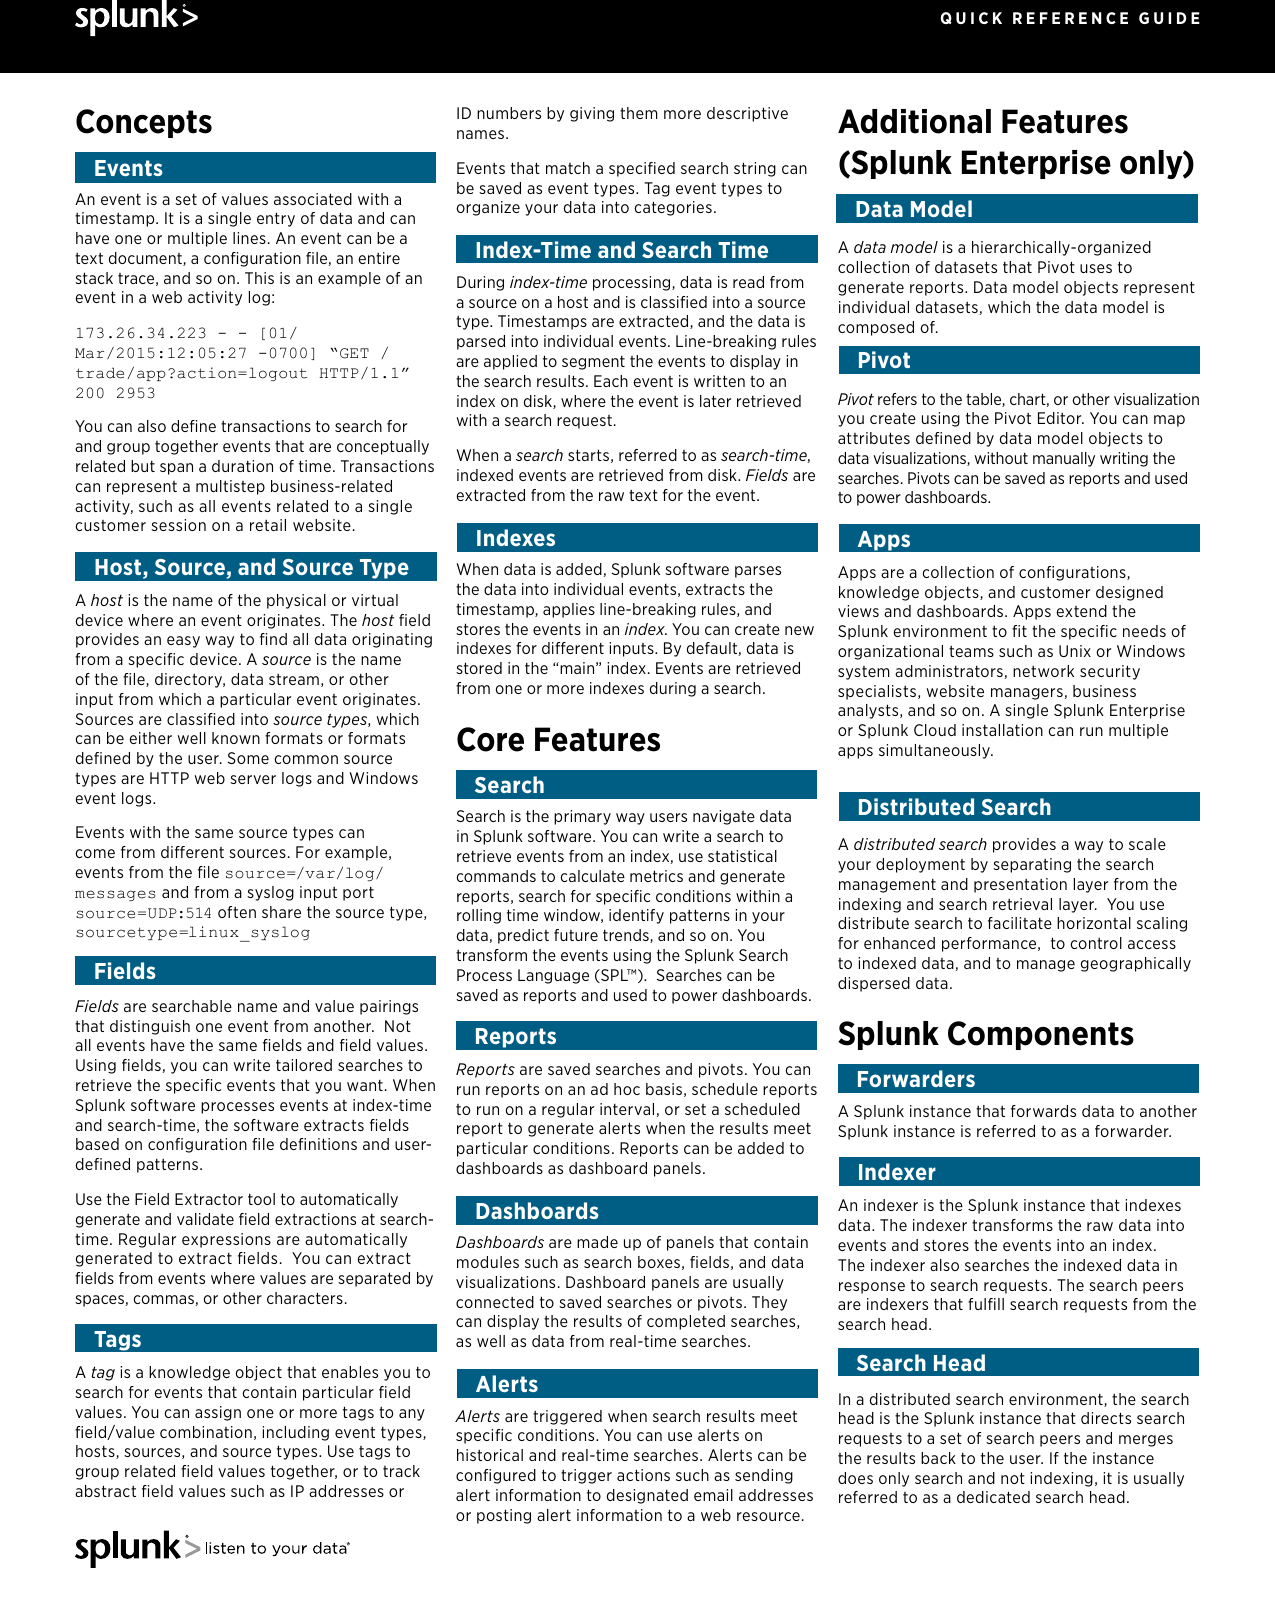 Page 1 of 6 - Splunk-quick-reference-guide